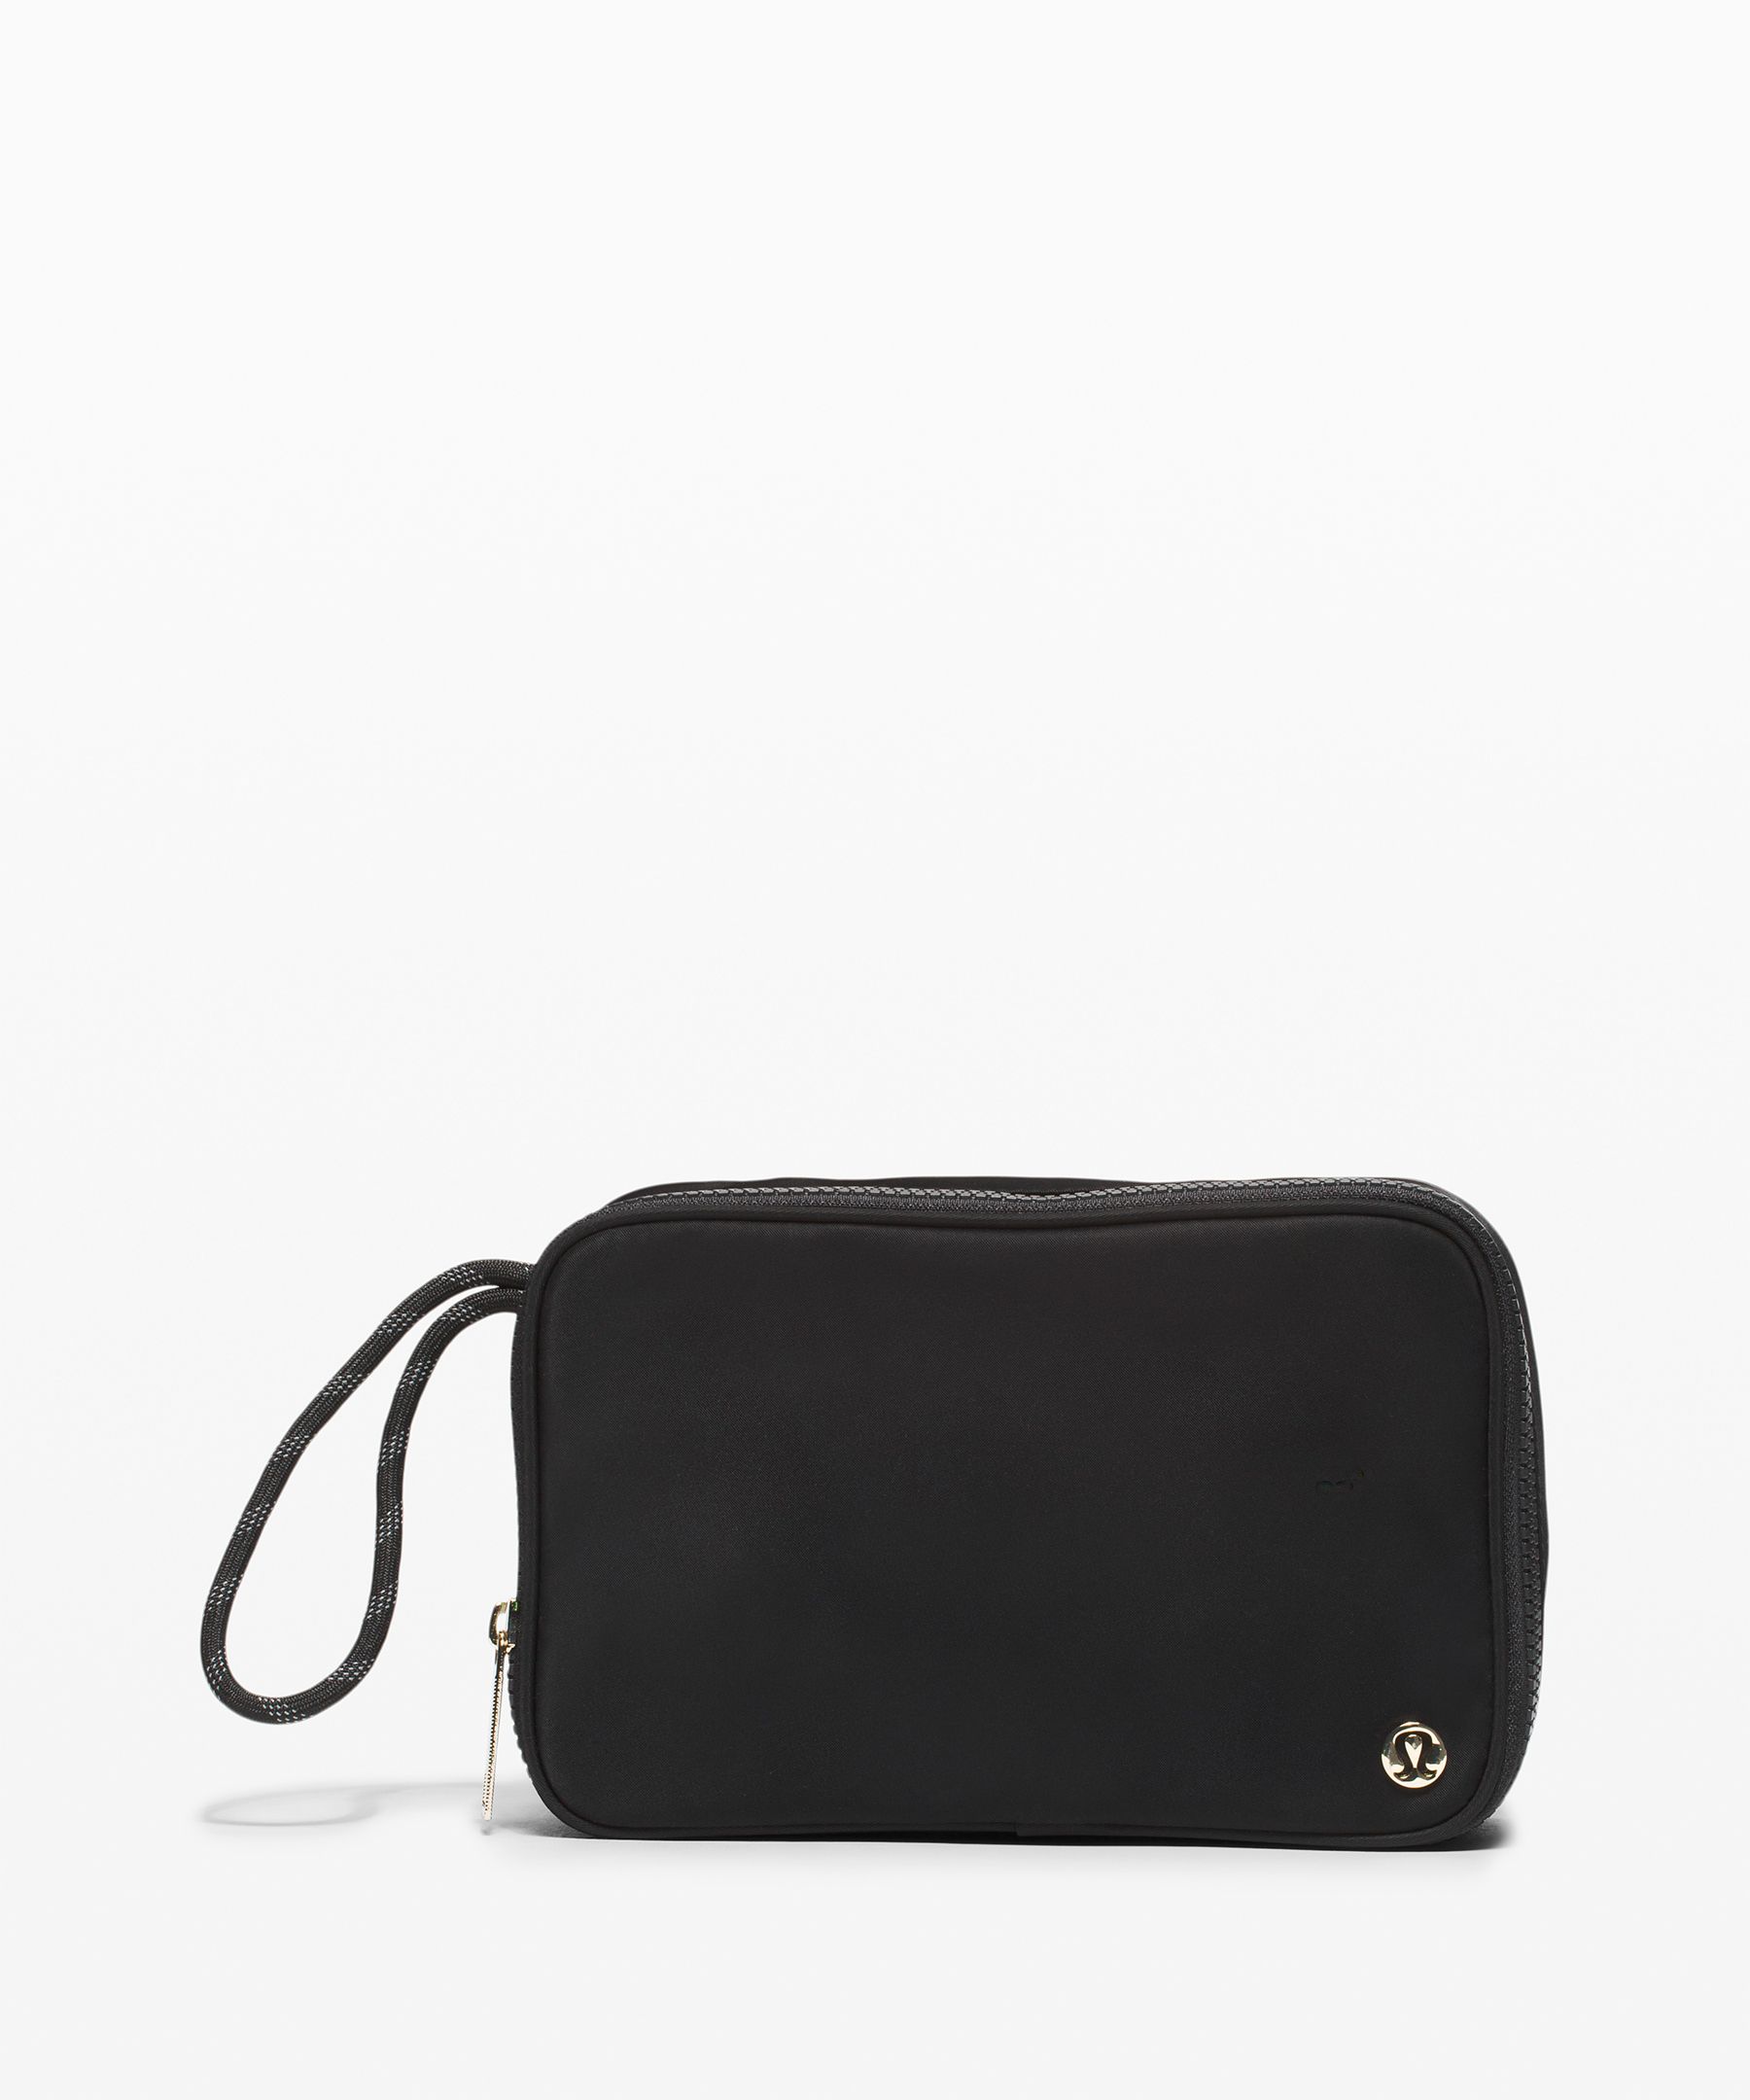 Lululemon Small Things Count Kit In Black/gold